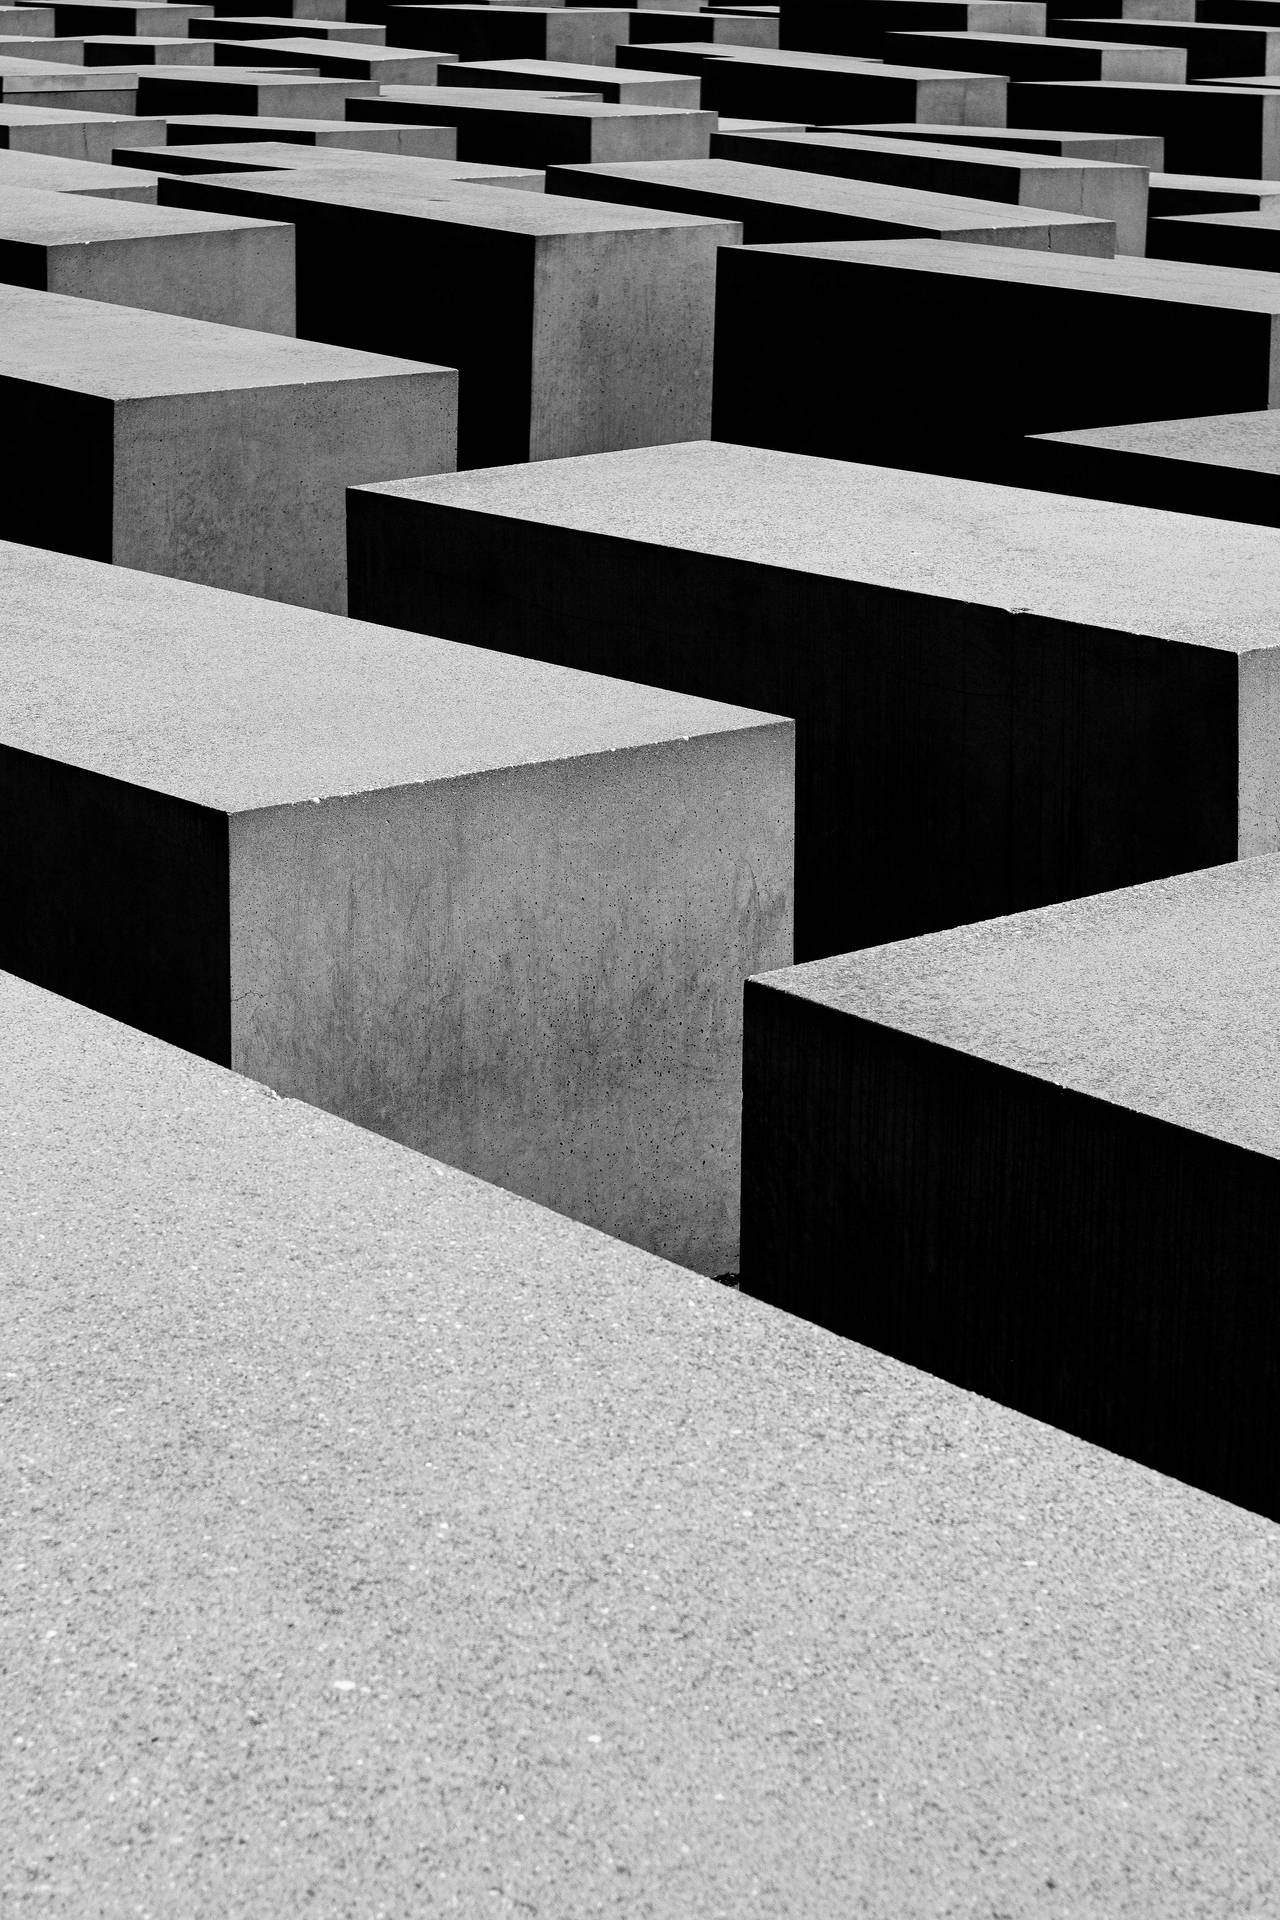 Concrete 3330X4994 Wallpaper and Background Image